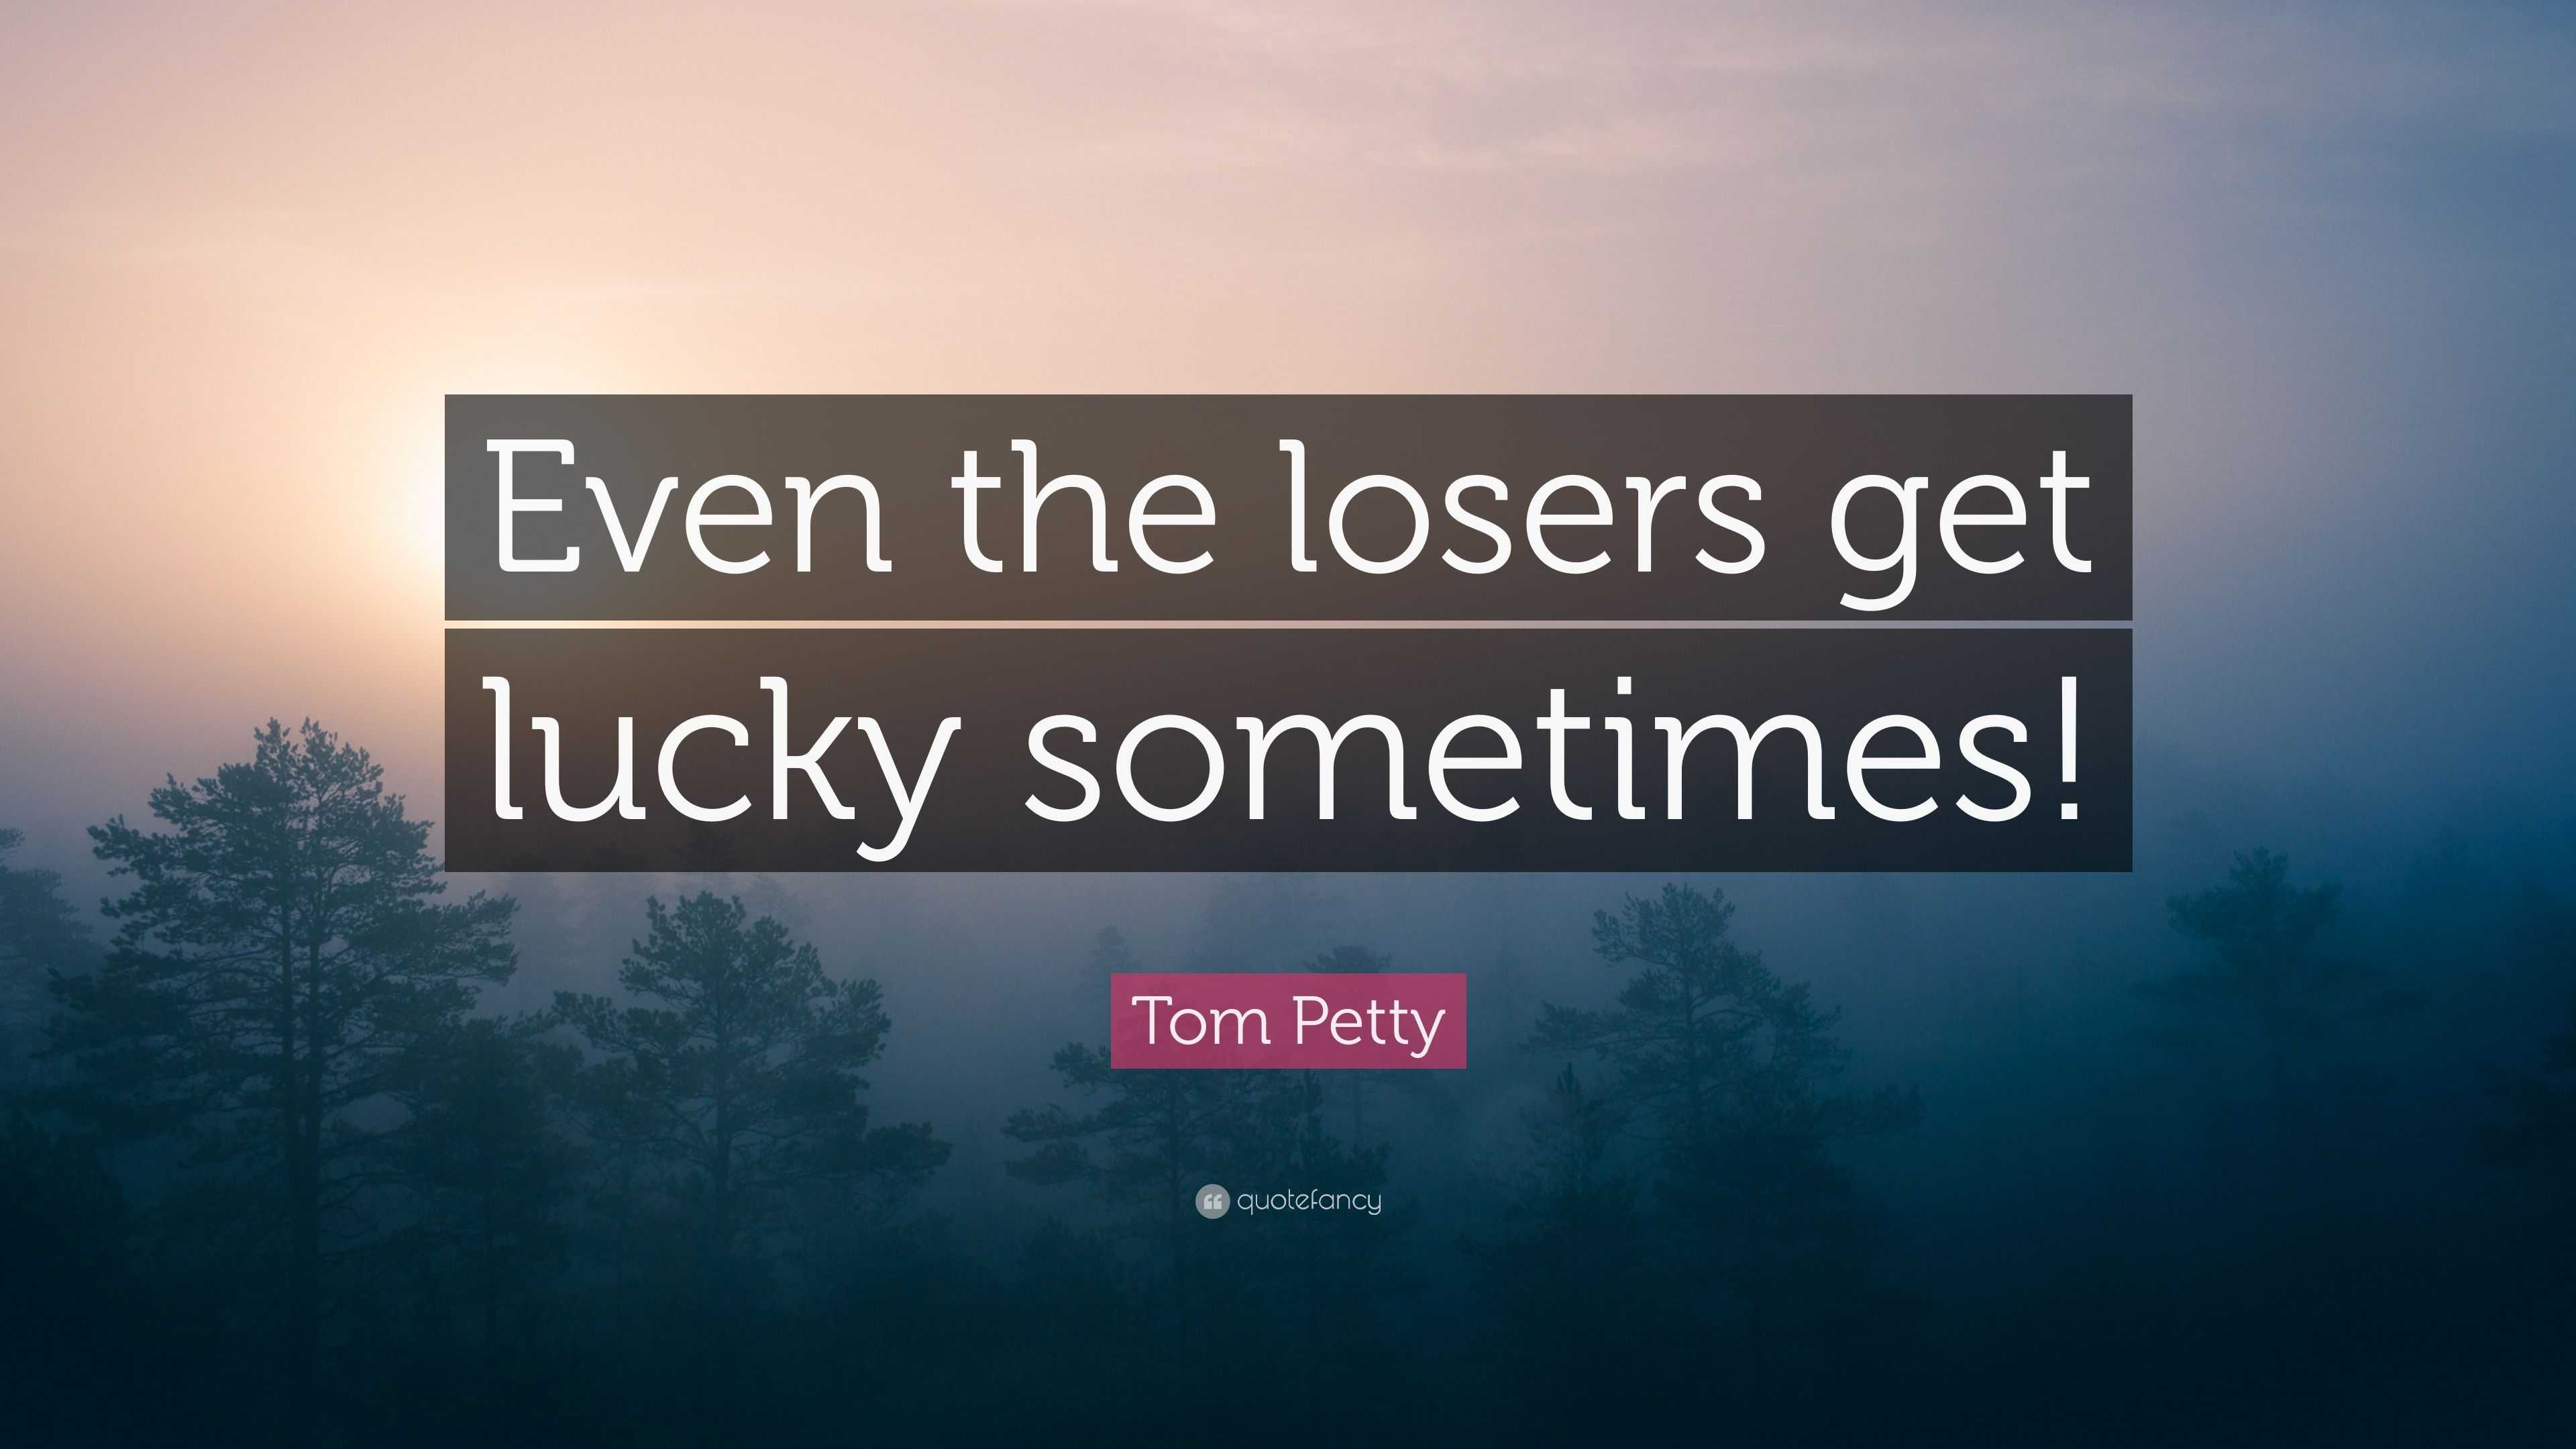 2731995-Tom-Petty-Quote-Even-the-losers-get-lucky-sometimes.jpg